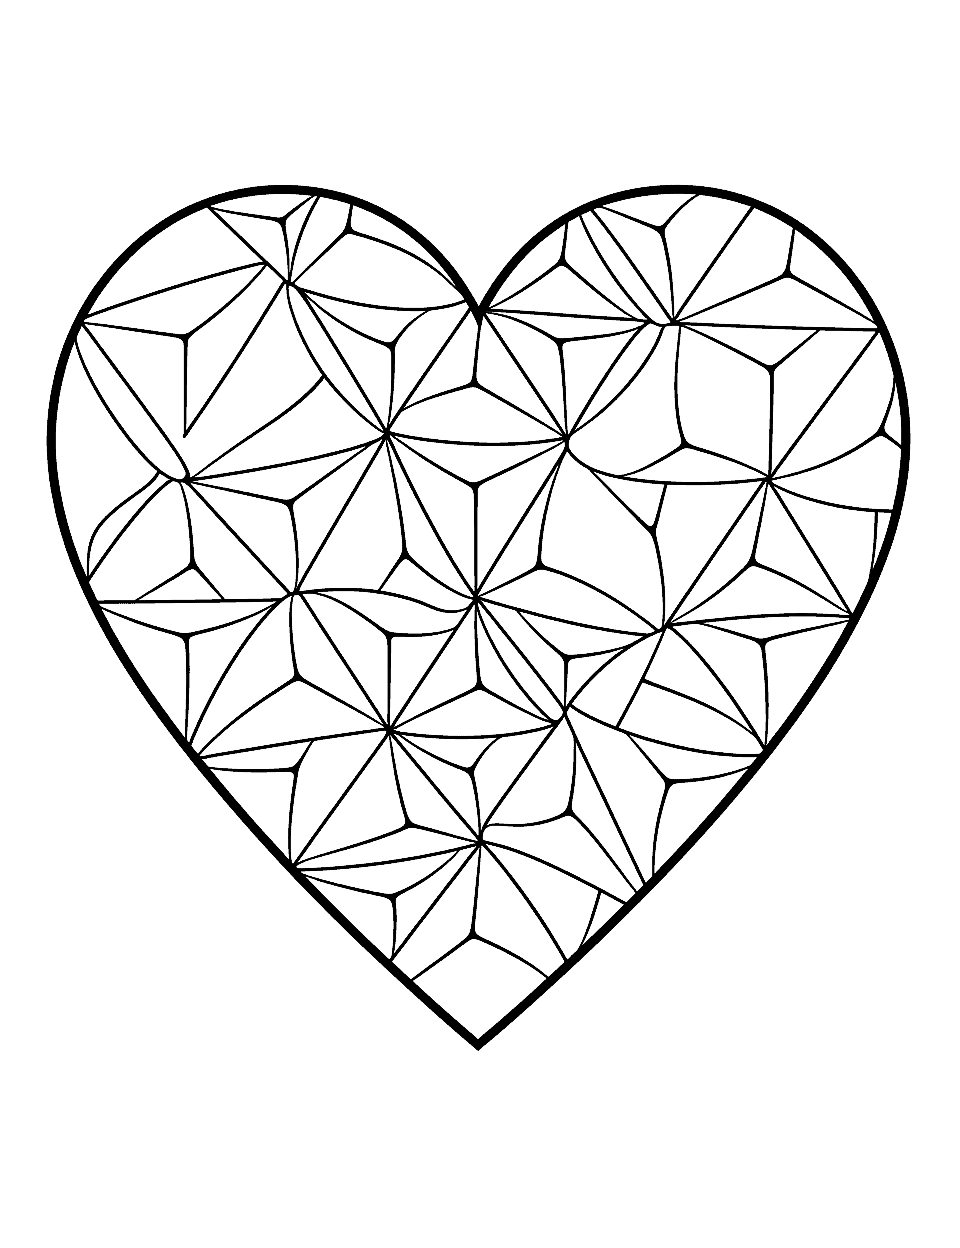 Valentine's Heart Origami Coloring Page - Heart-shaped origami with patterns to color.